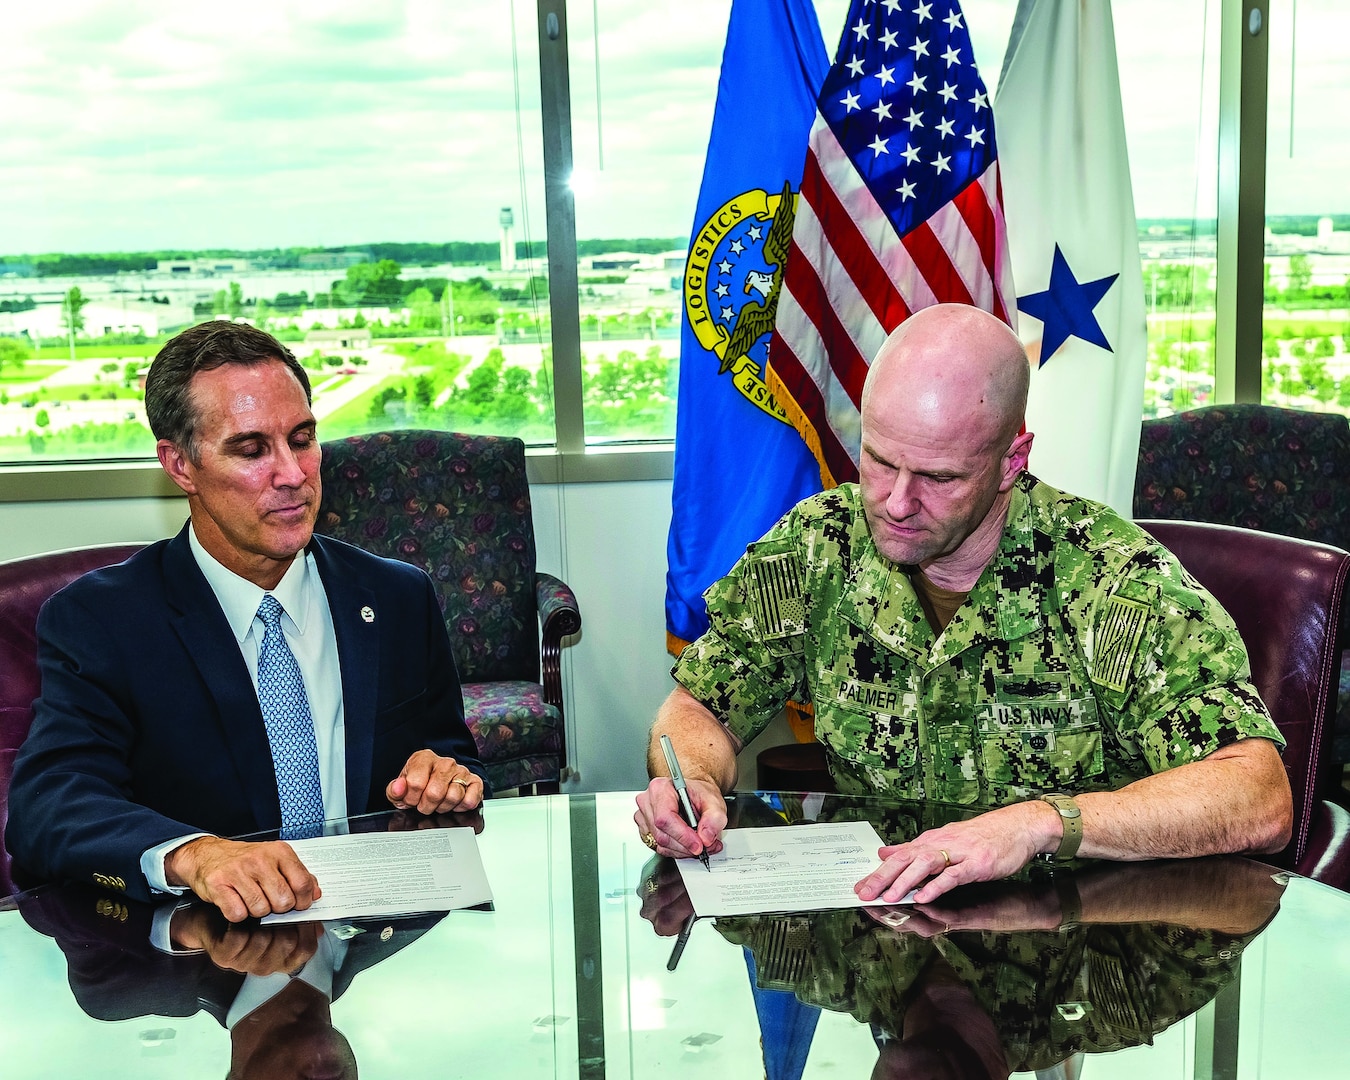 A civilian and military man sit at a table with papers in front of them.